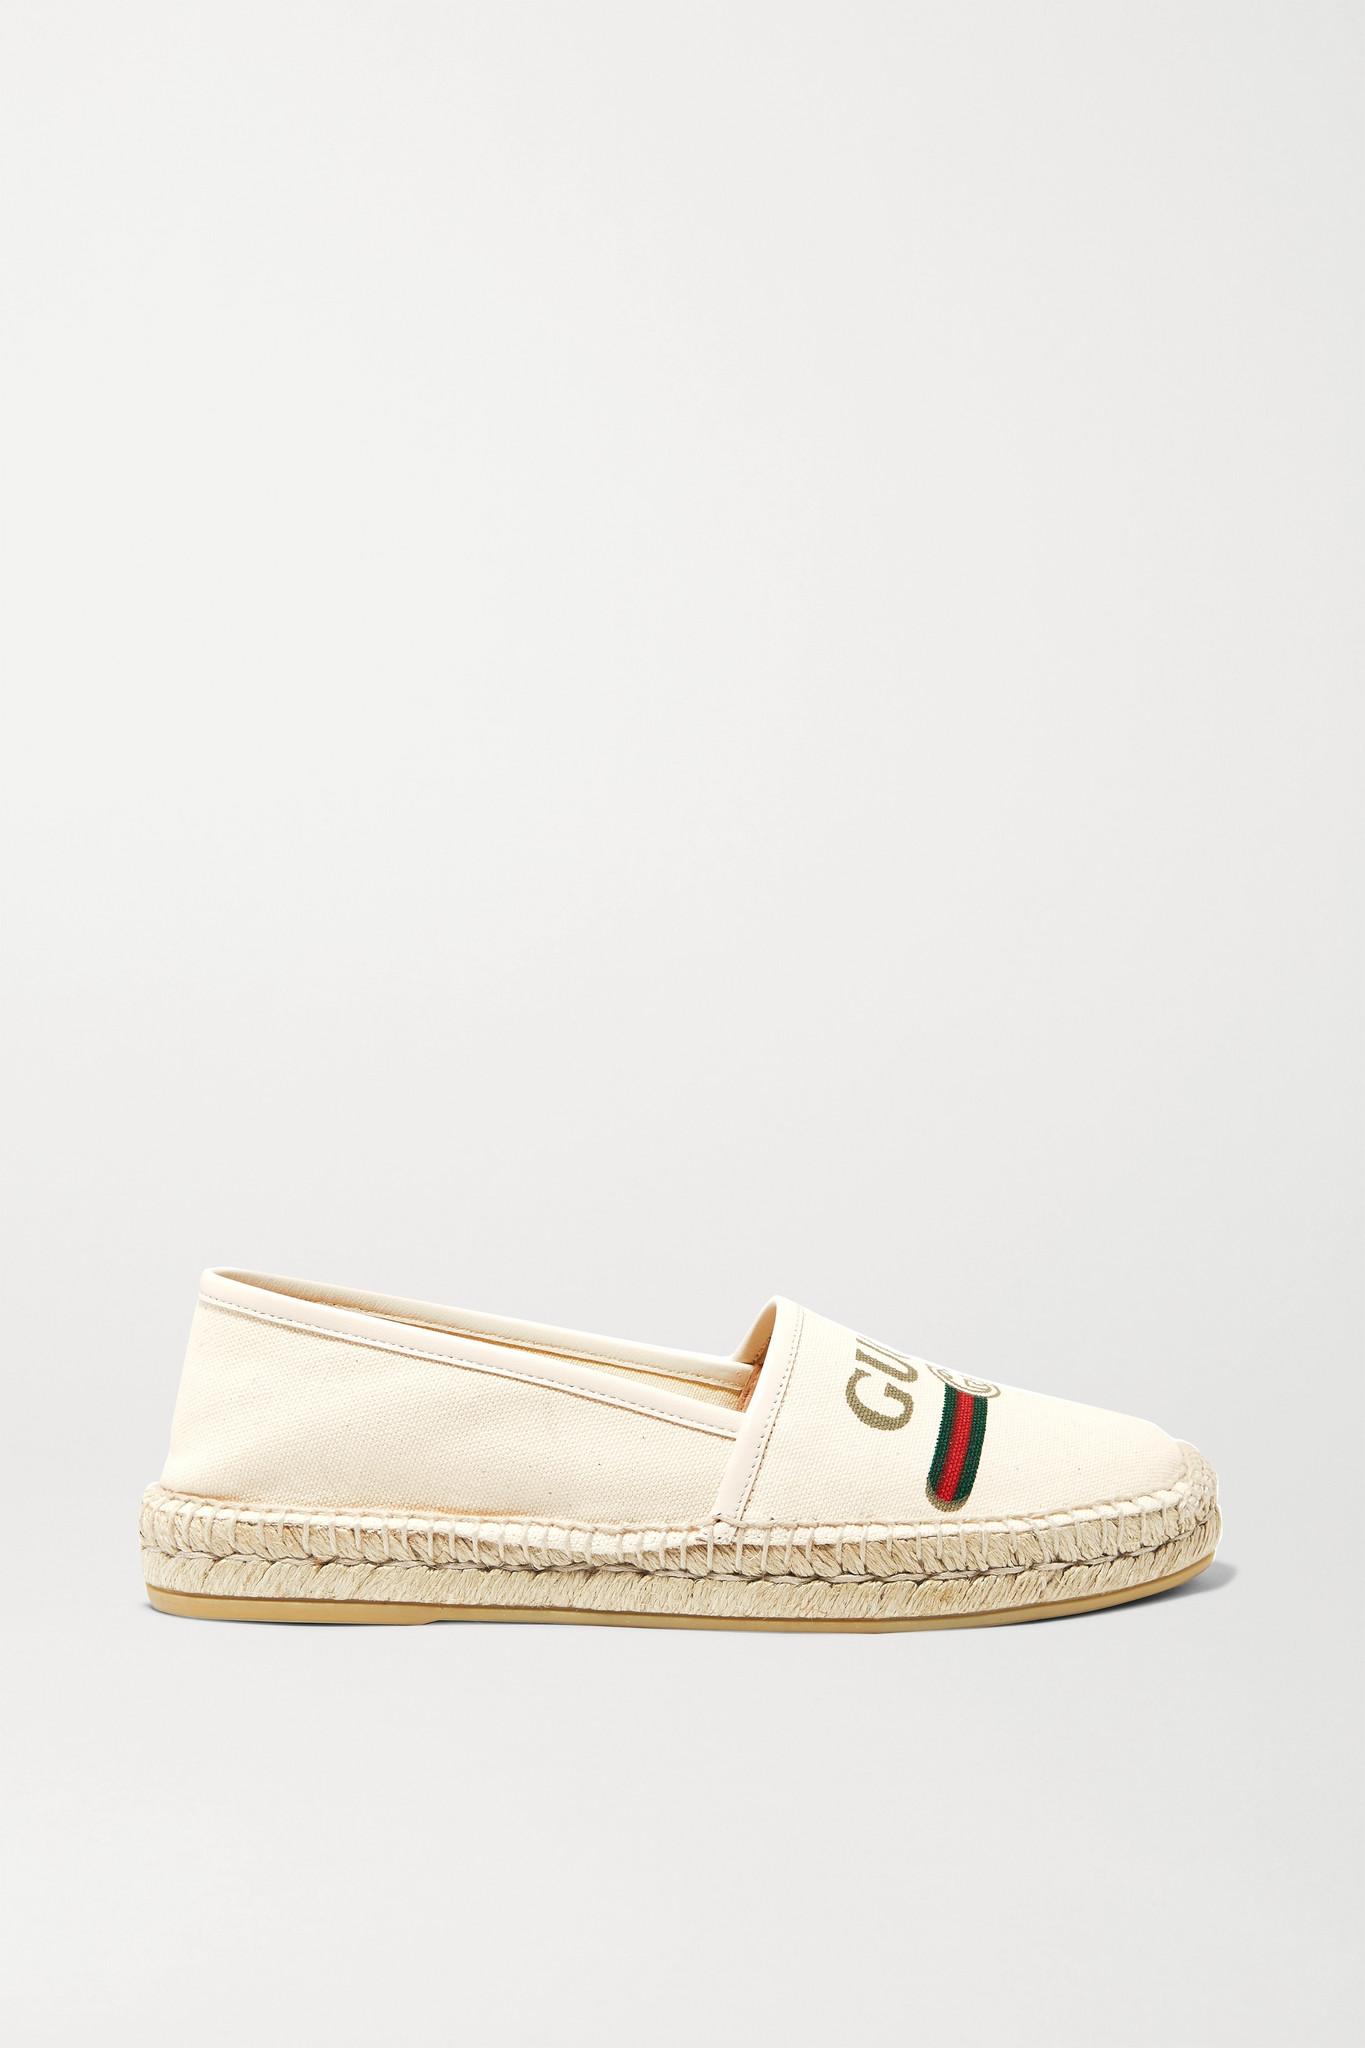 Gucci Leather-trimmed Logo-print Canvas Espadrilles in White | Lyst